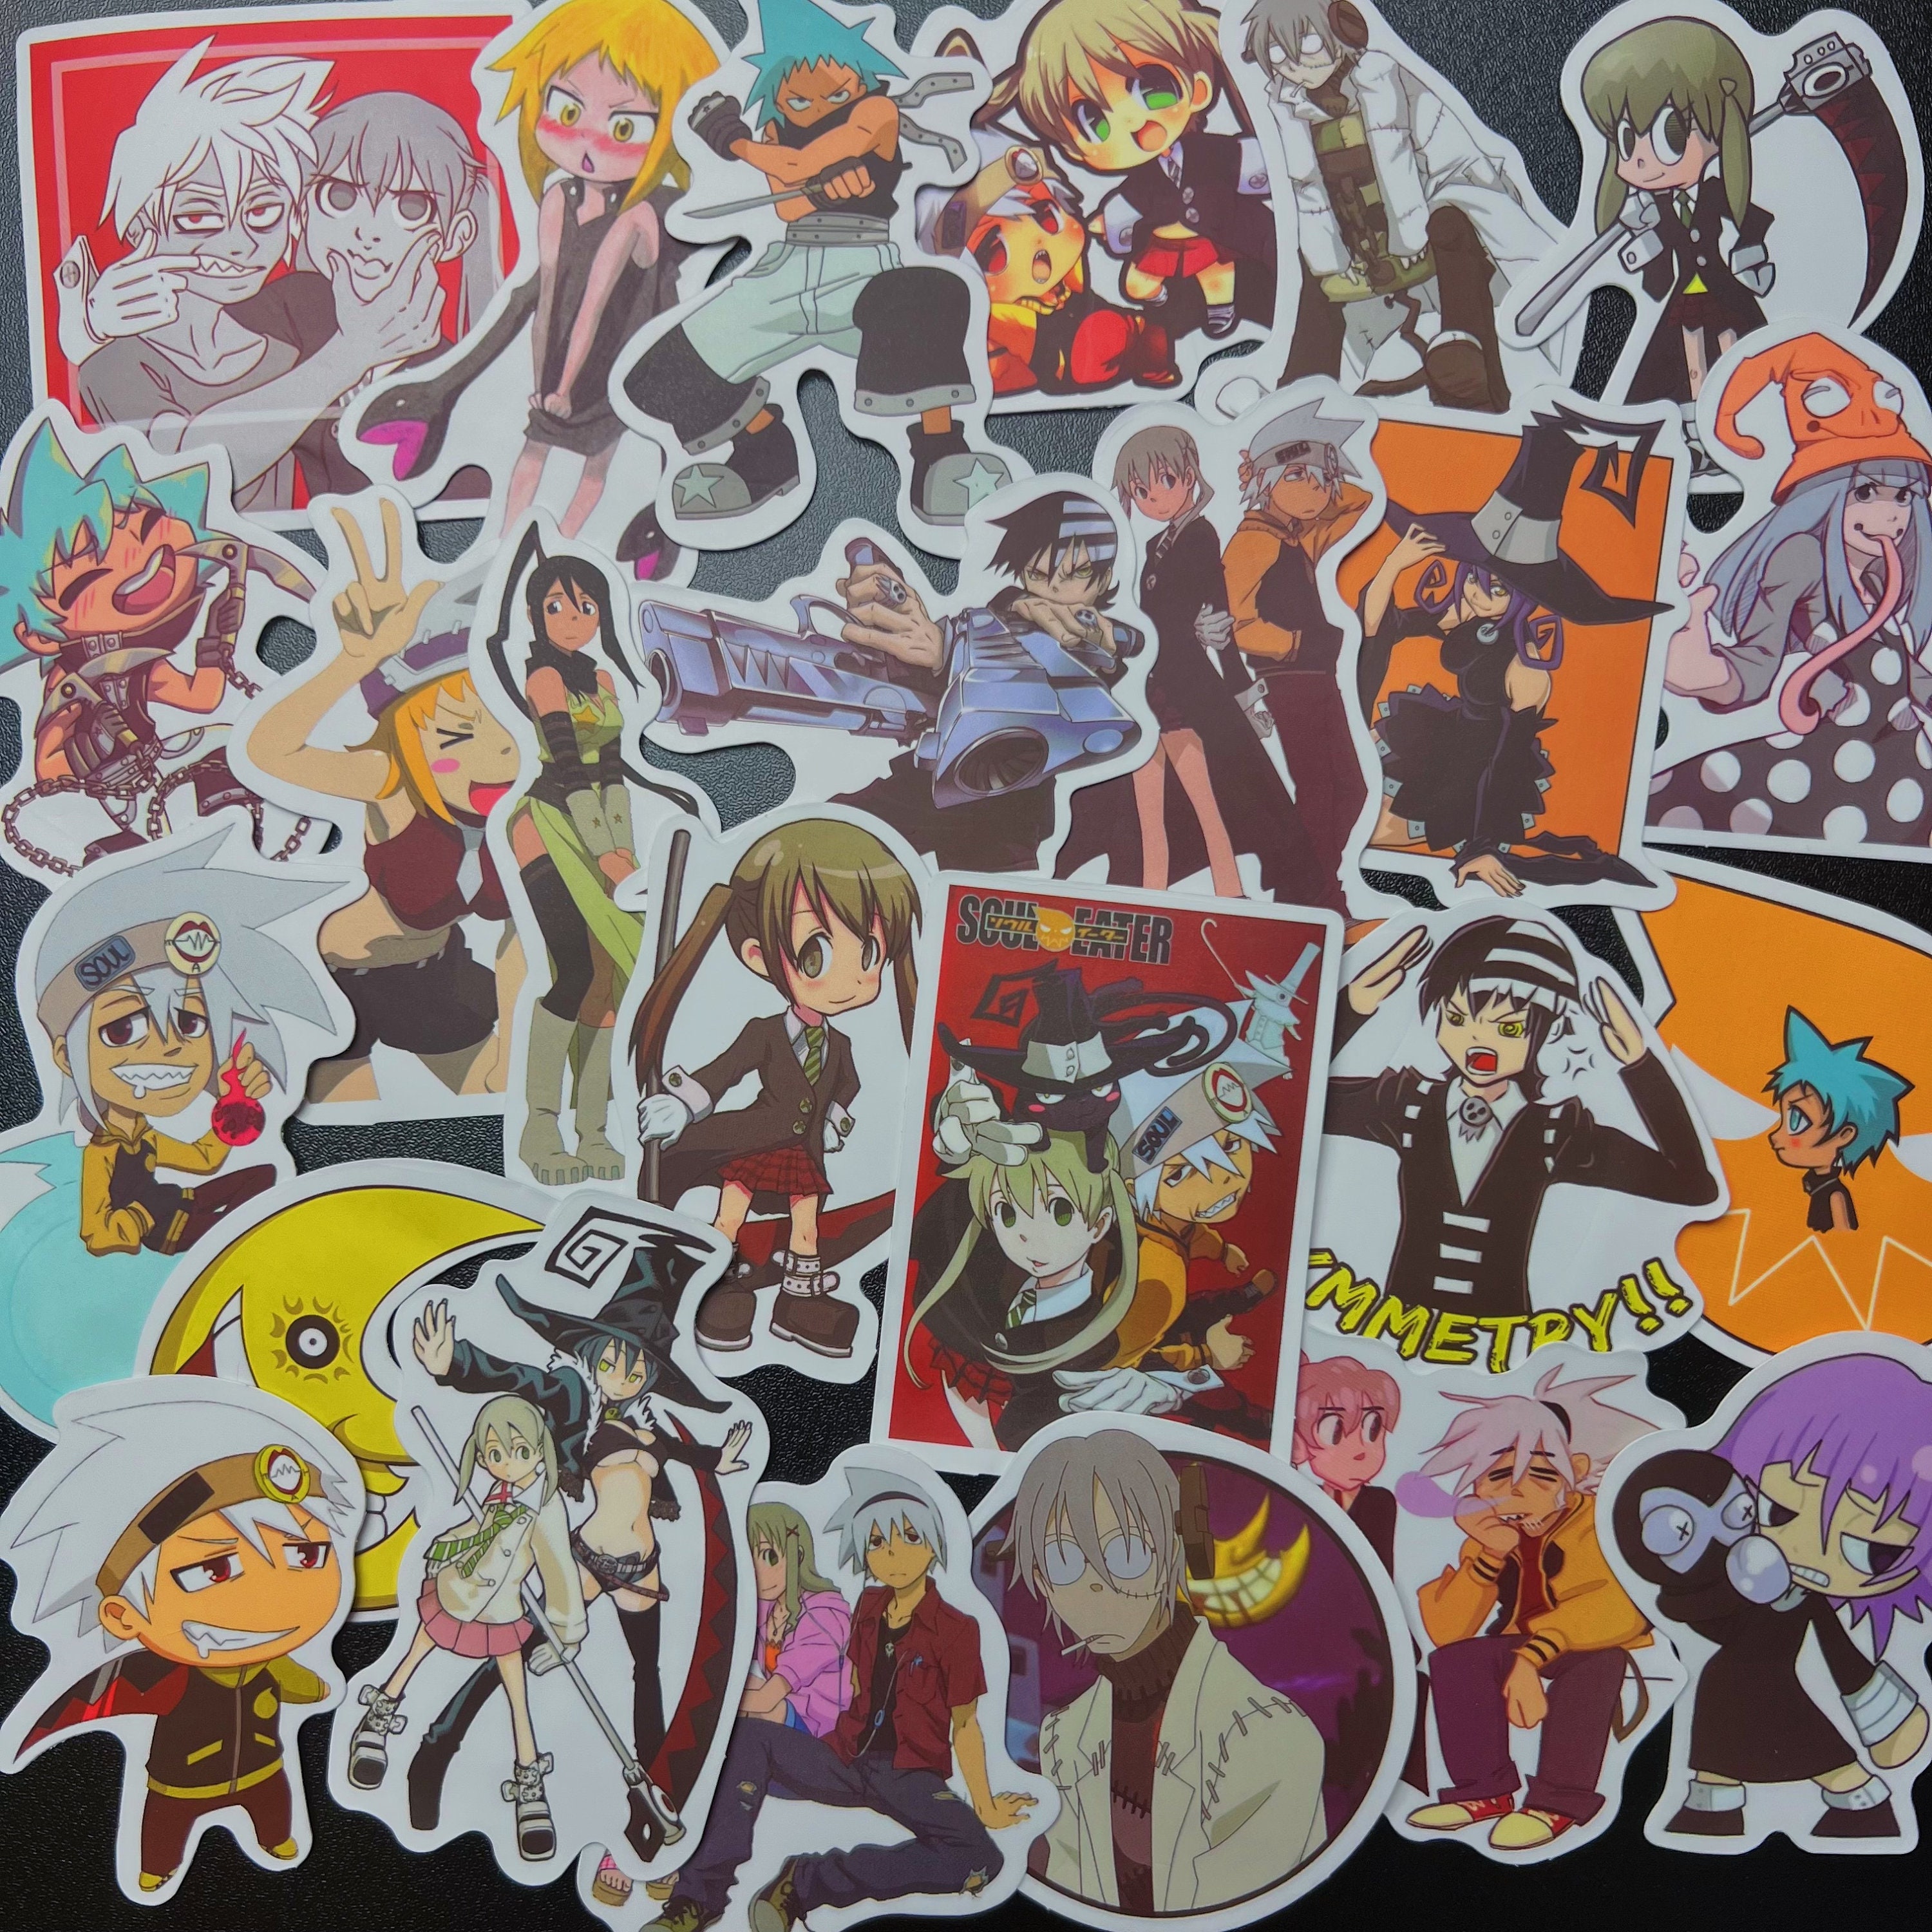 soul eater all characters Sticker for Sale by onlydrawning